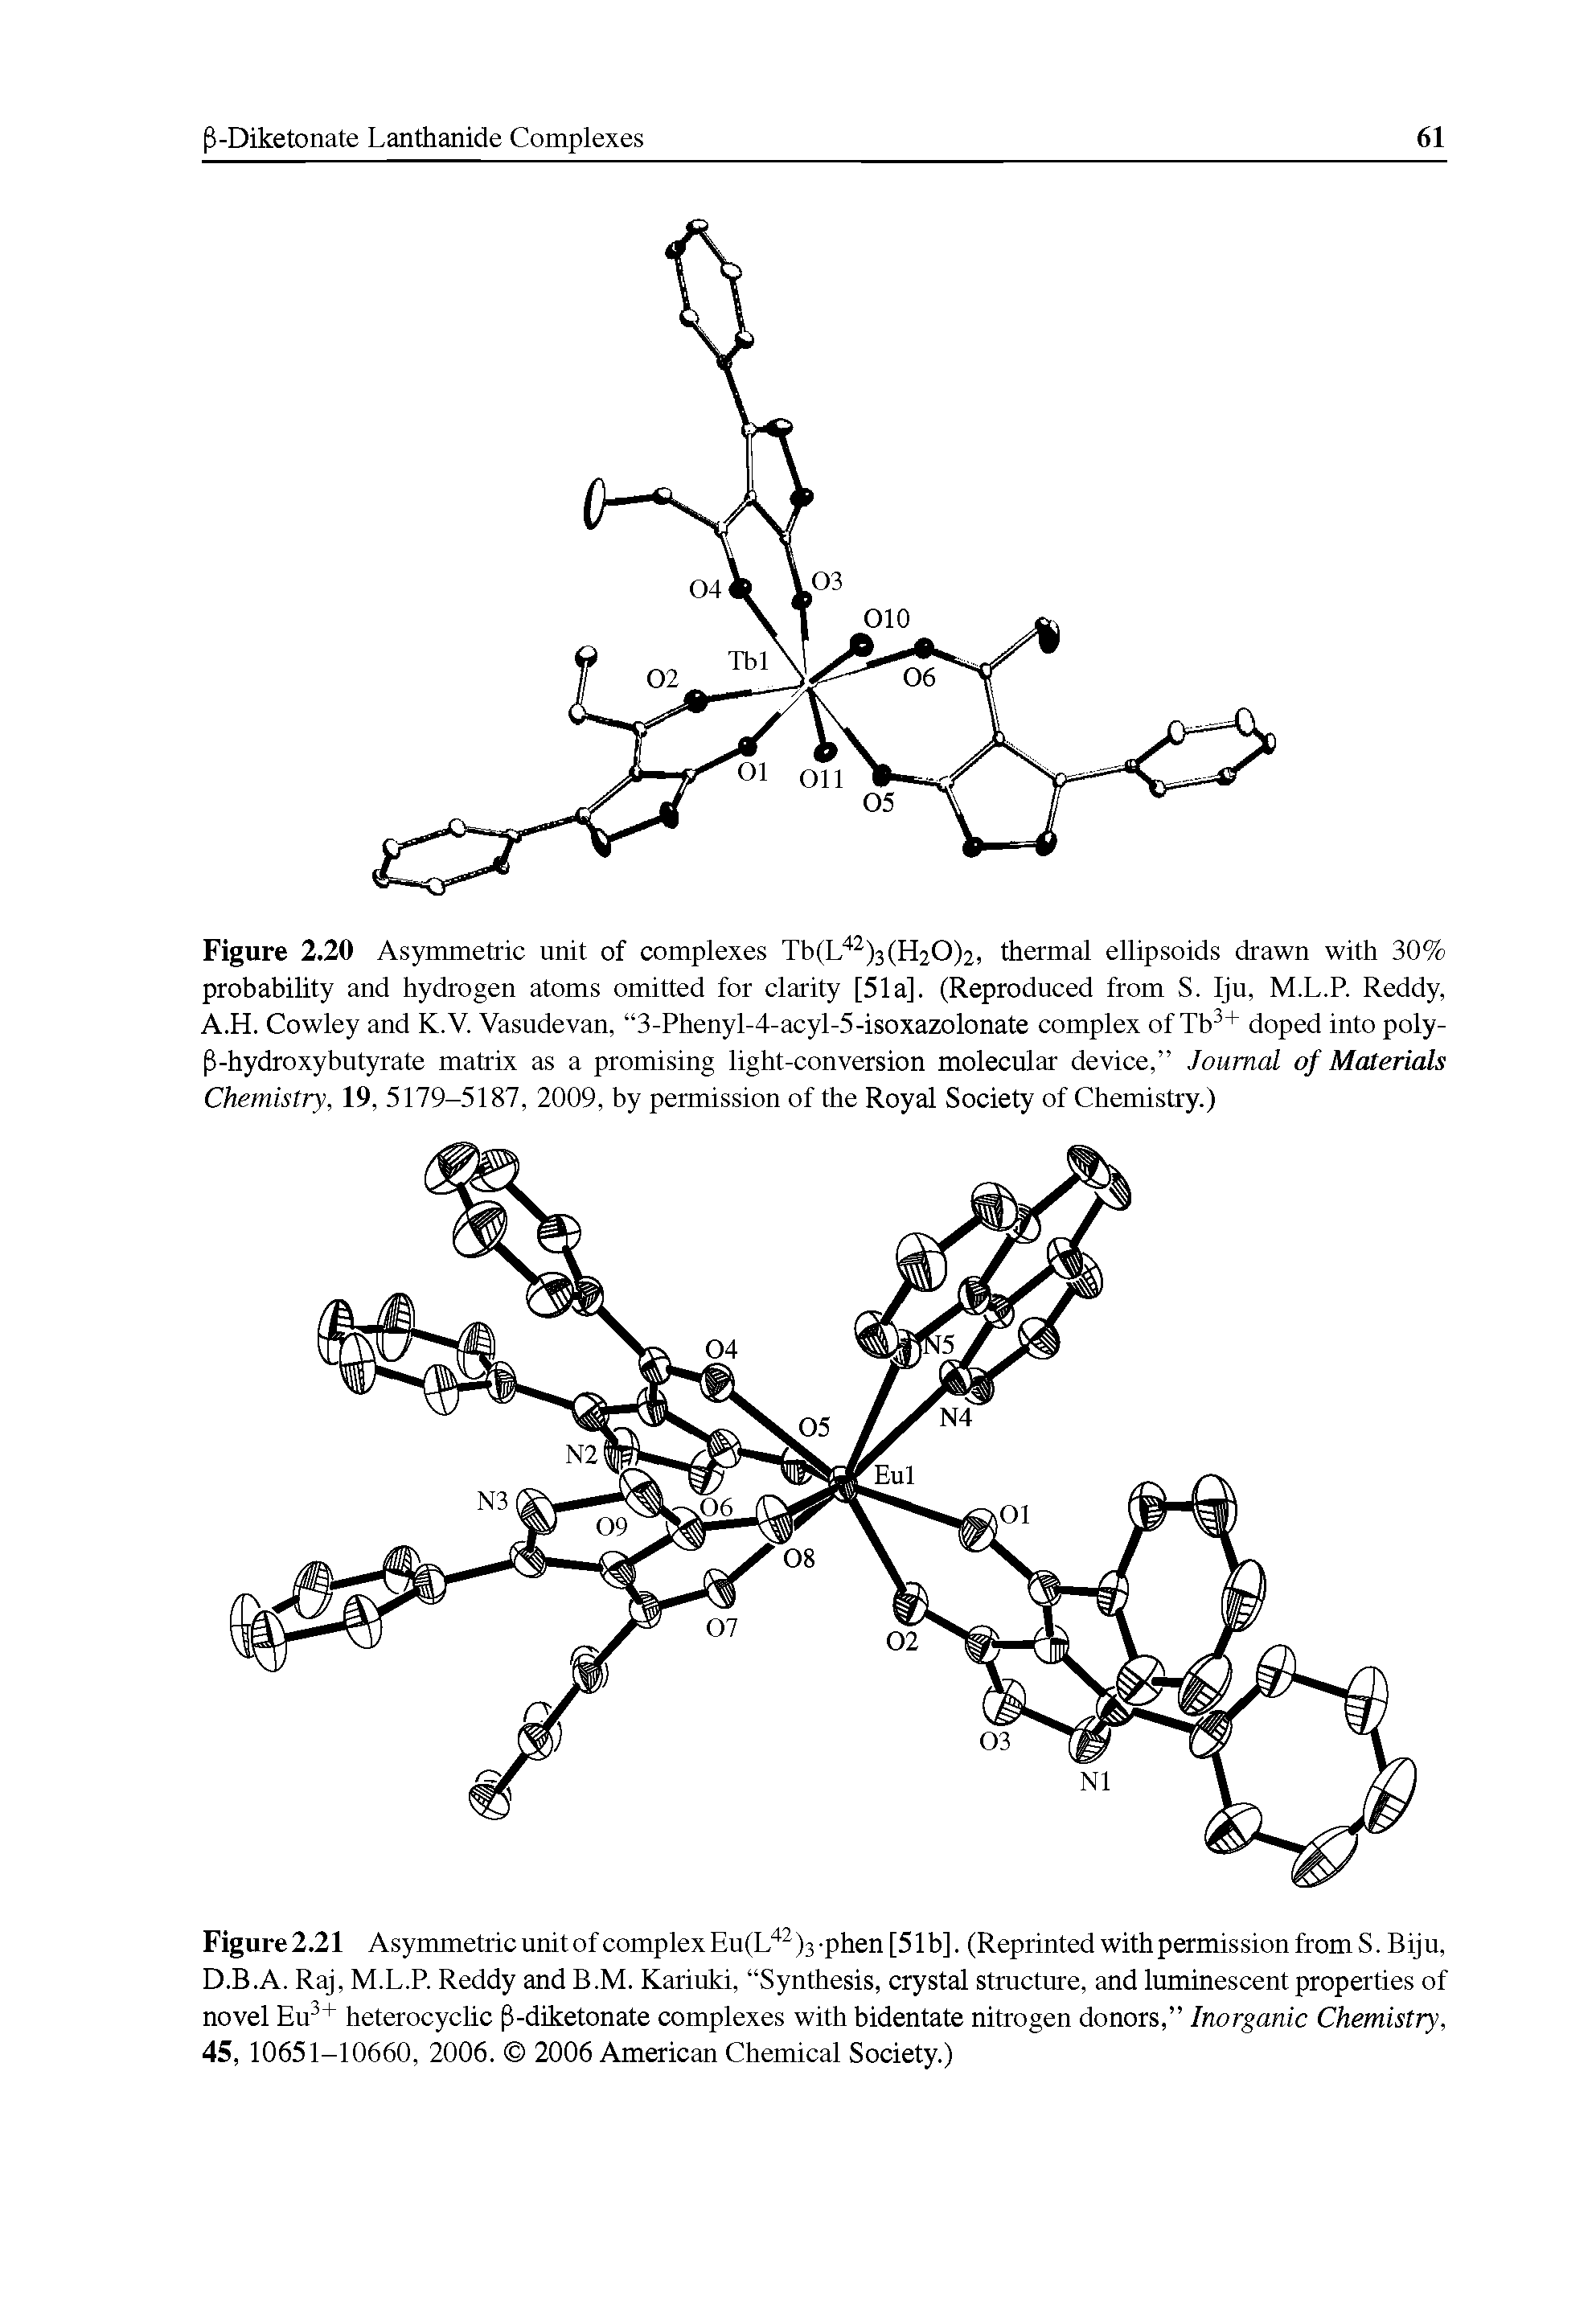 Figure 2.21 Asymmetric unit of complex Eu(L )3 -phen [51b], (Reprinted with permission from S. Biju, D.B.A. Raj, M.L.P. Reddy and B.M. Kariuki, Synthesis, crystal structure, and luminescent properties of novel Eu + heterocyclic -diketonate complexes with bidentate nitrogen donors, Inorganic Chemistry, 45, 10651-10660, 2006. 2006 American Chemical Society.)...